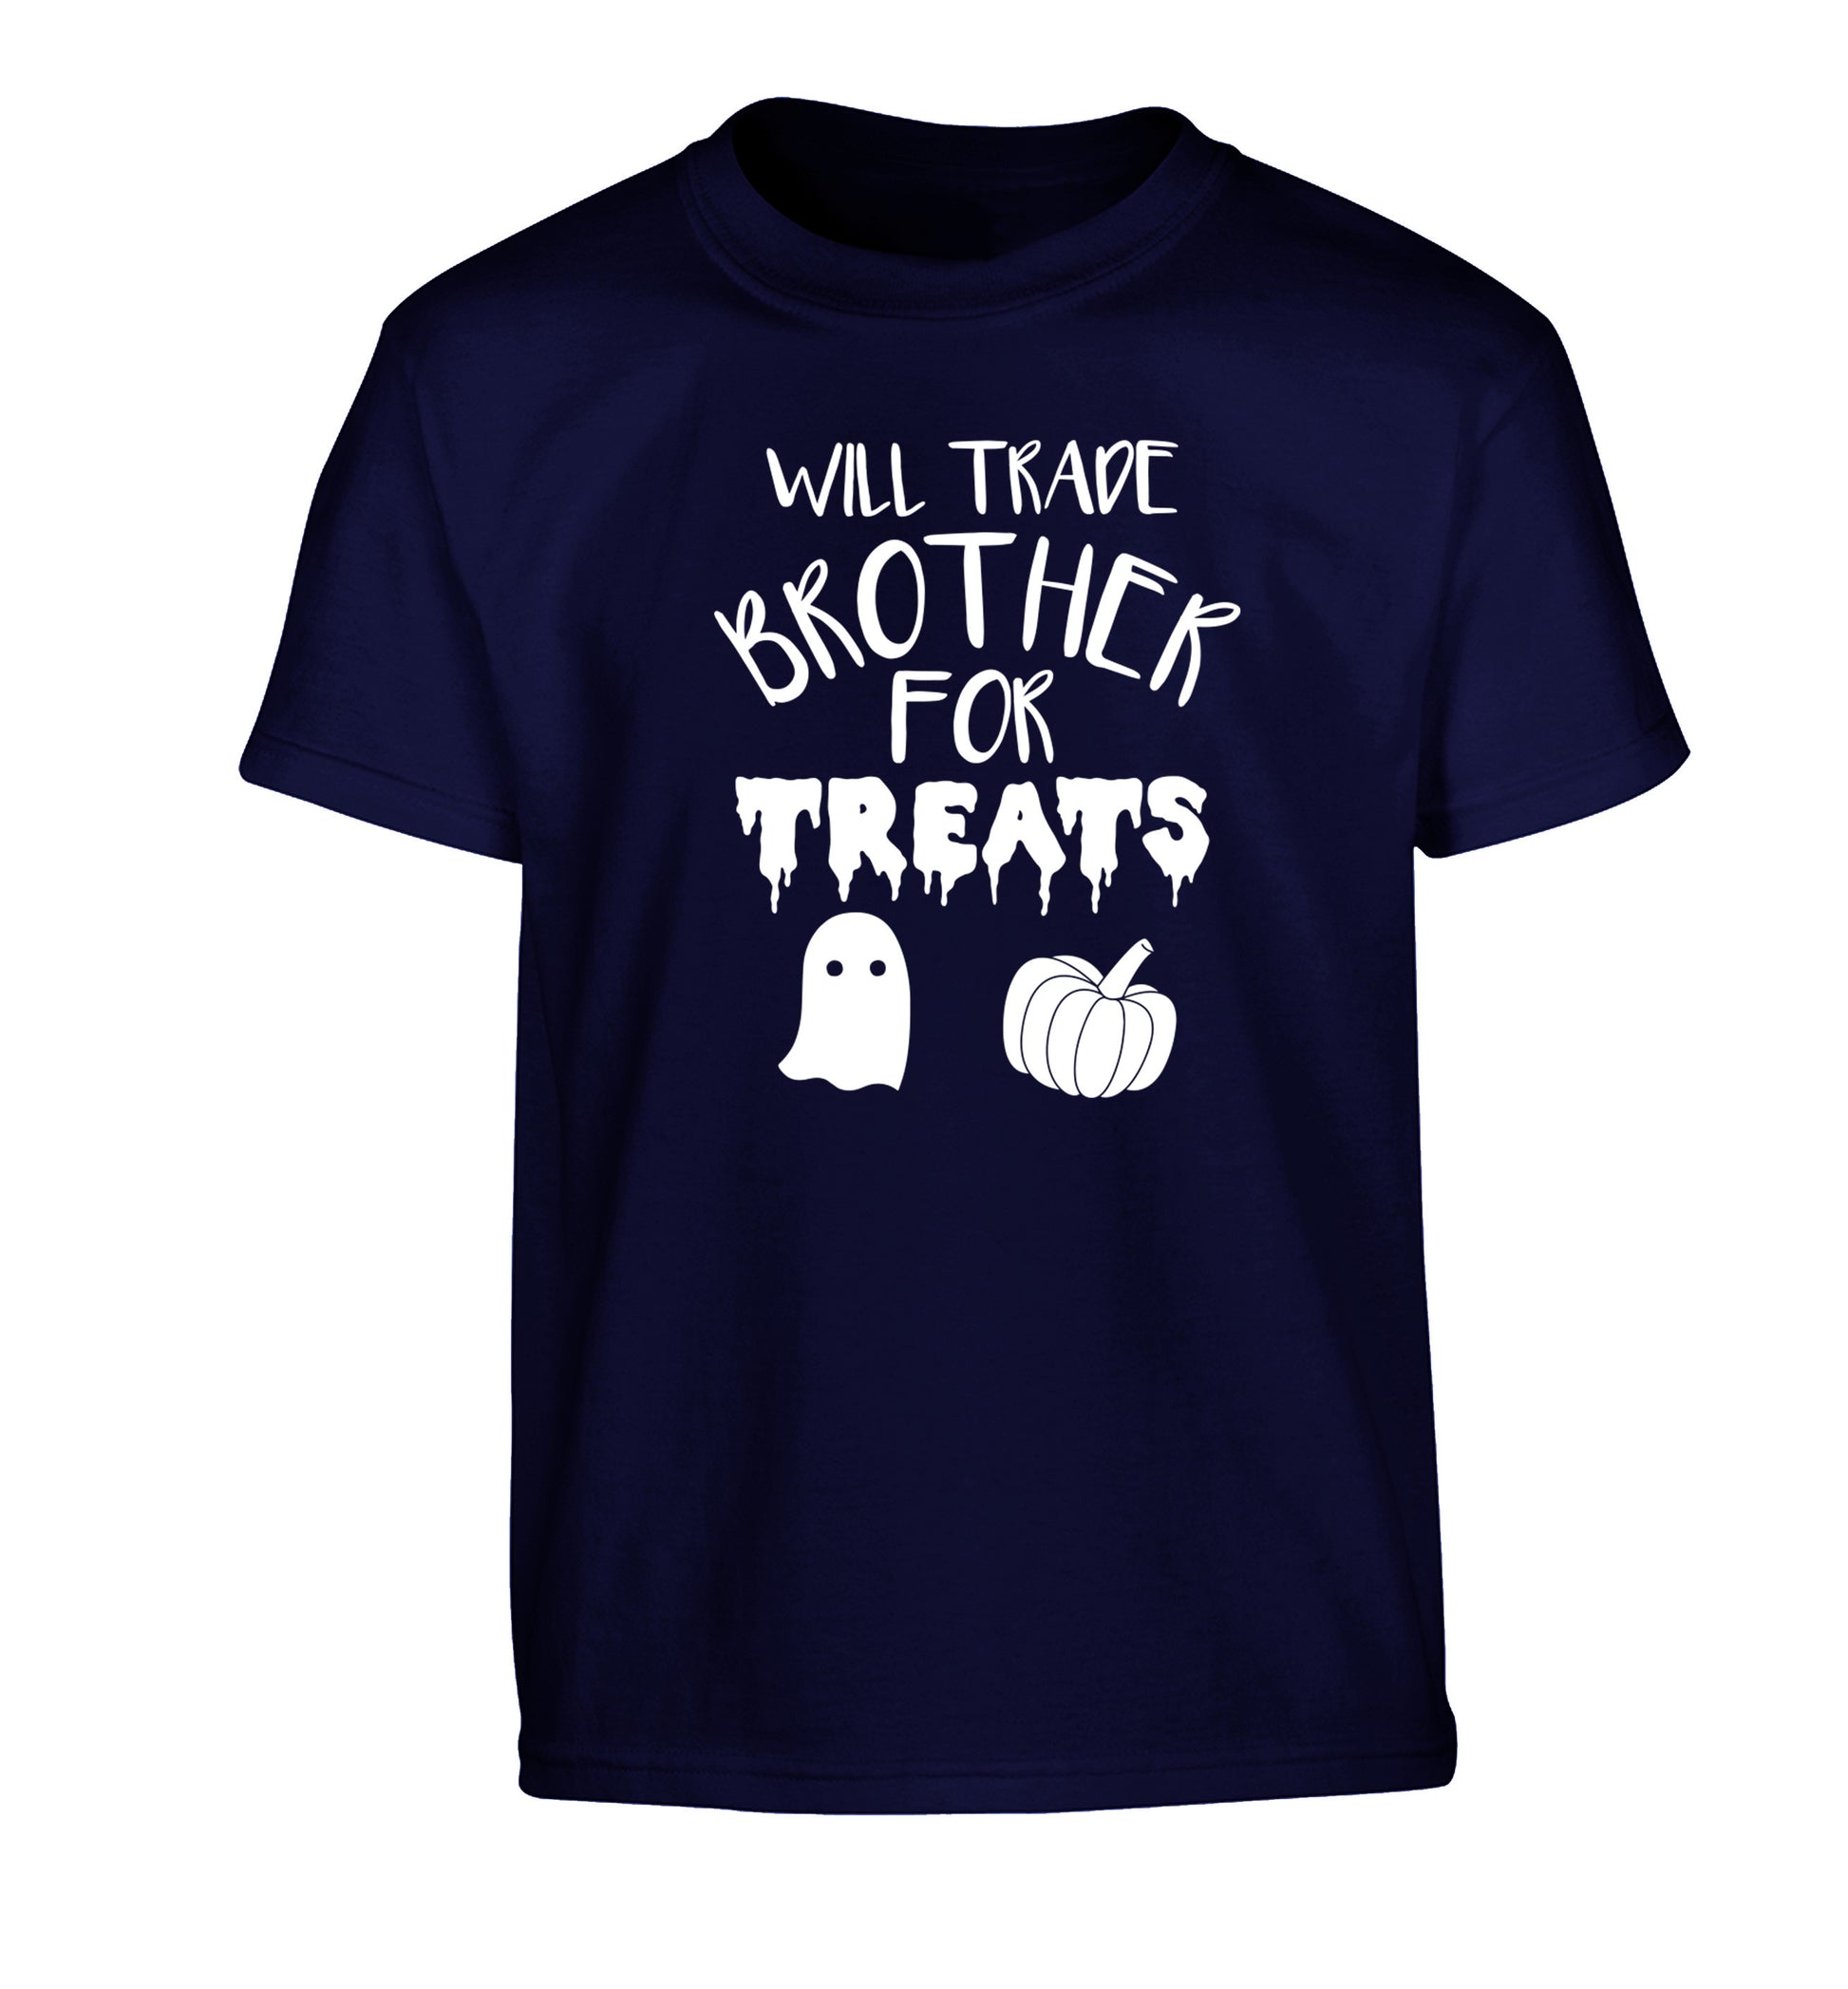 Will trade brother for treats Children's navy Tshirt 12-14 Years